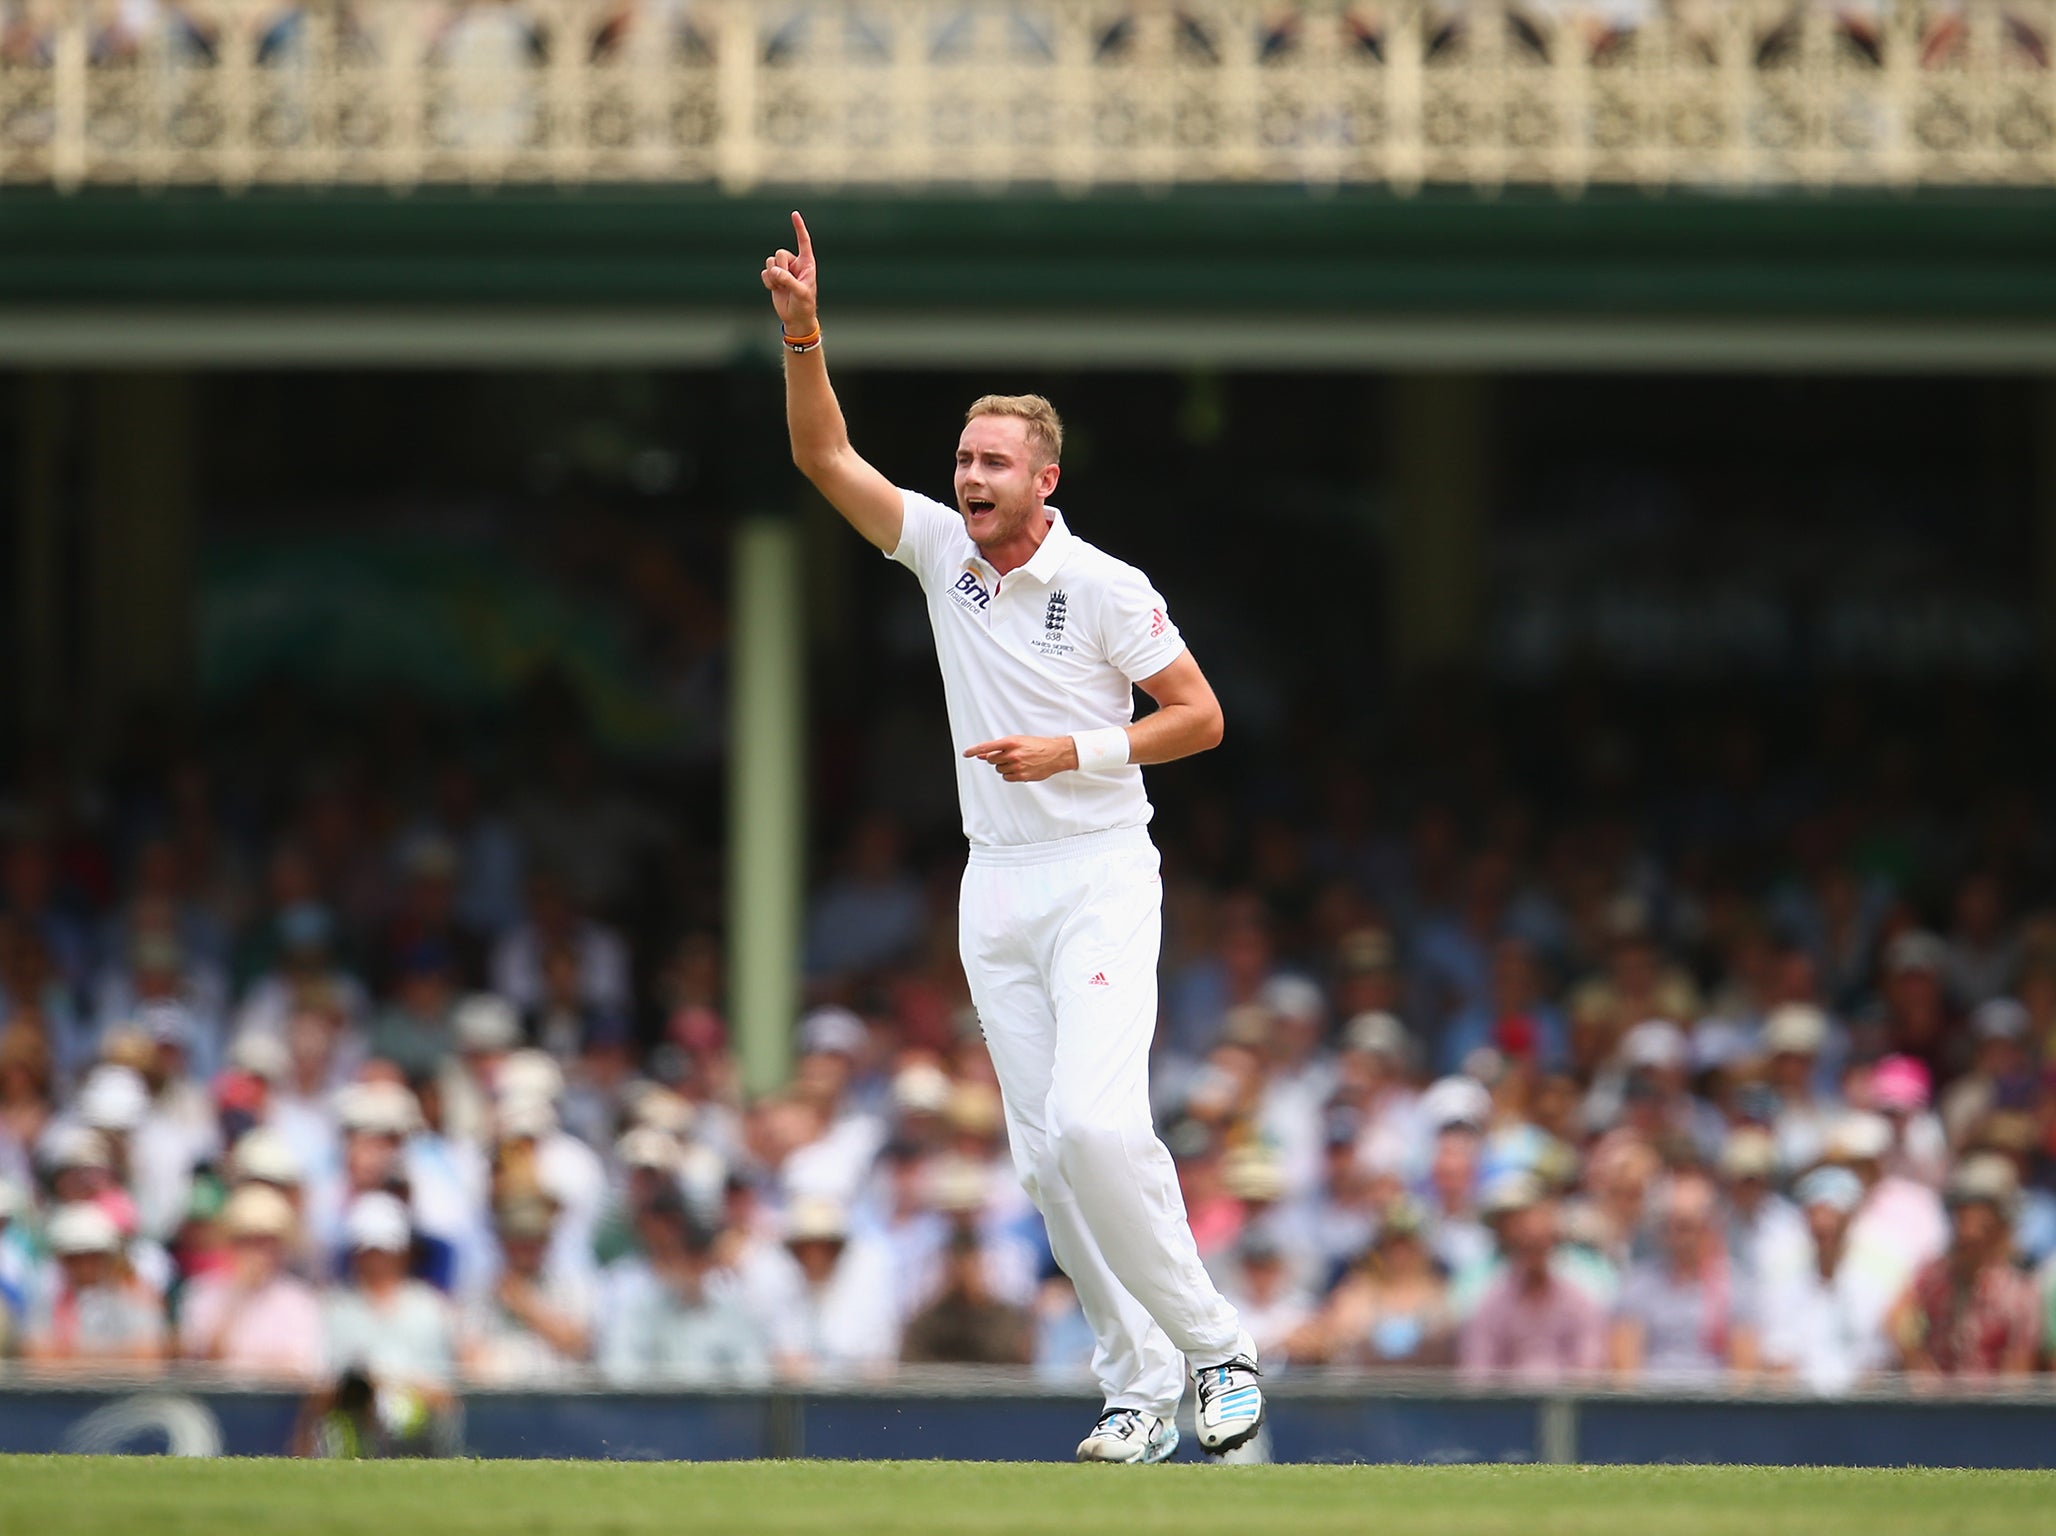 Broad performed well in the 2013/14 series despite England's 5-0 defeat